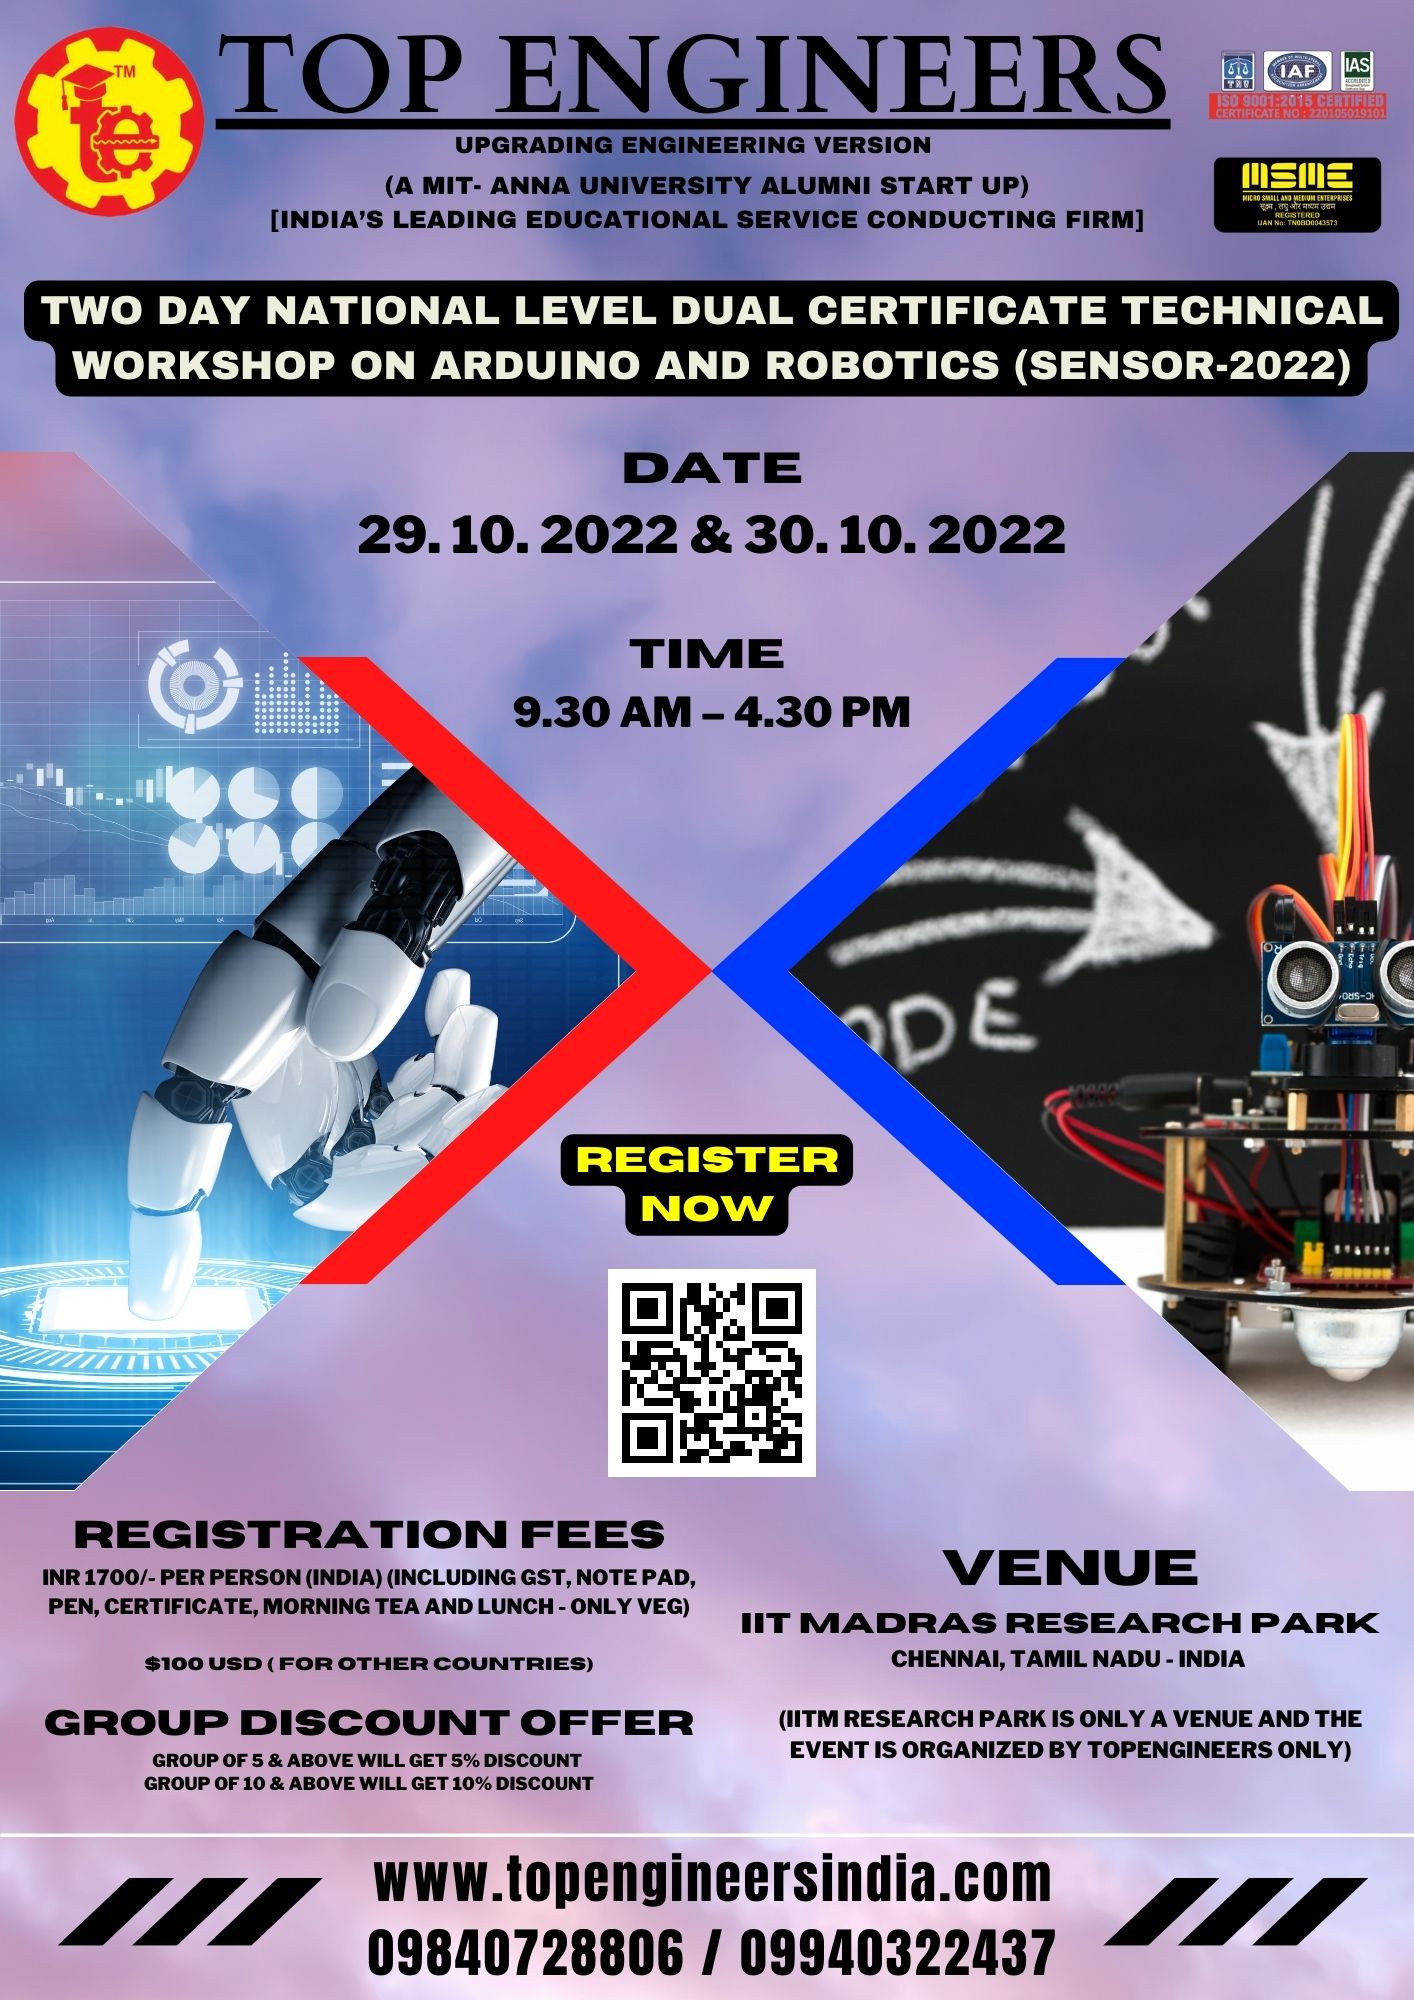 Two Day National Level Dual Certificate Technical Workshop on Arduino and Robotics (Sensor-2022)